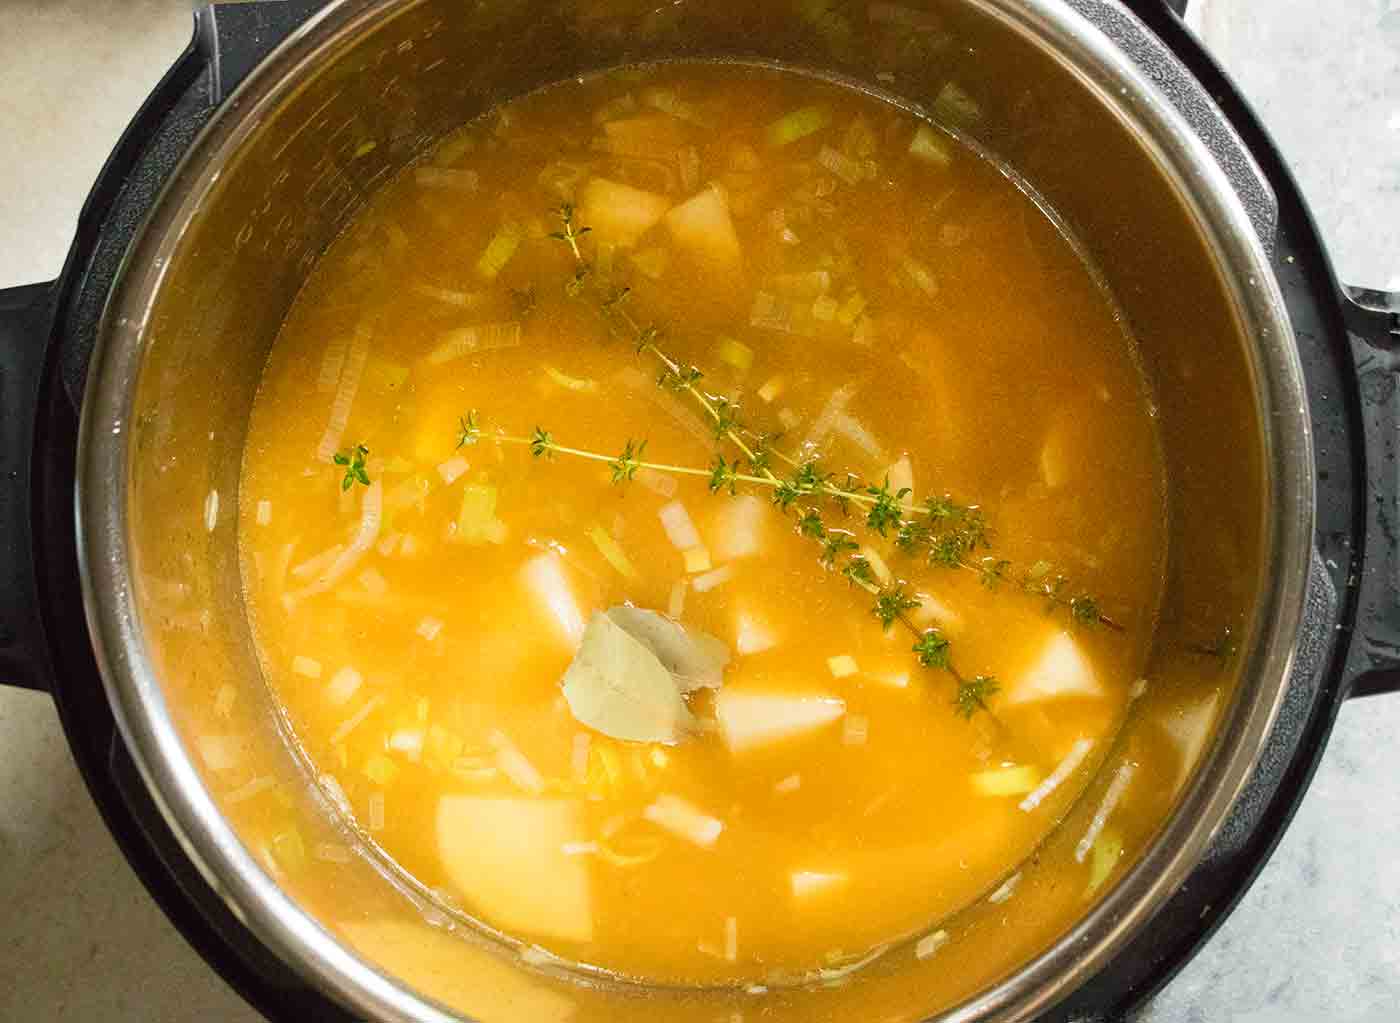 Potato leek soup ready to cook in the Instant Pot